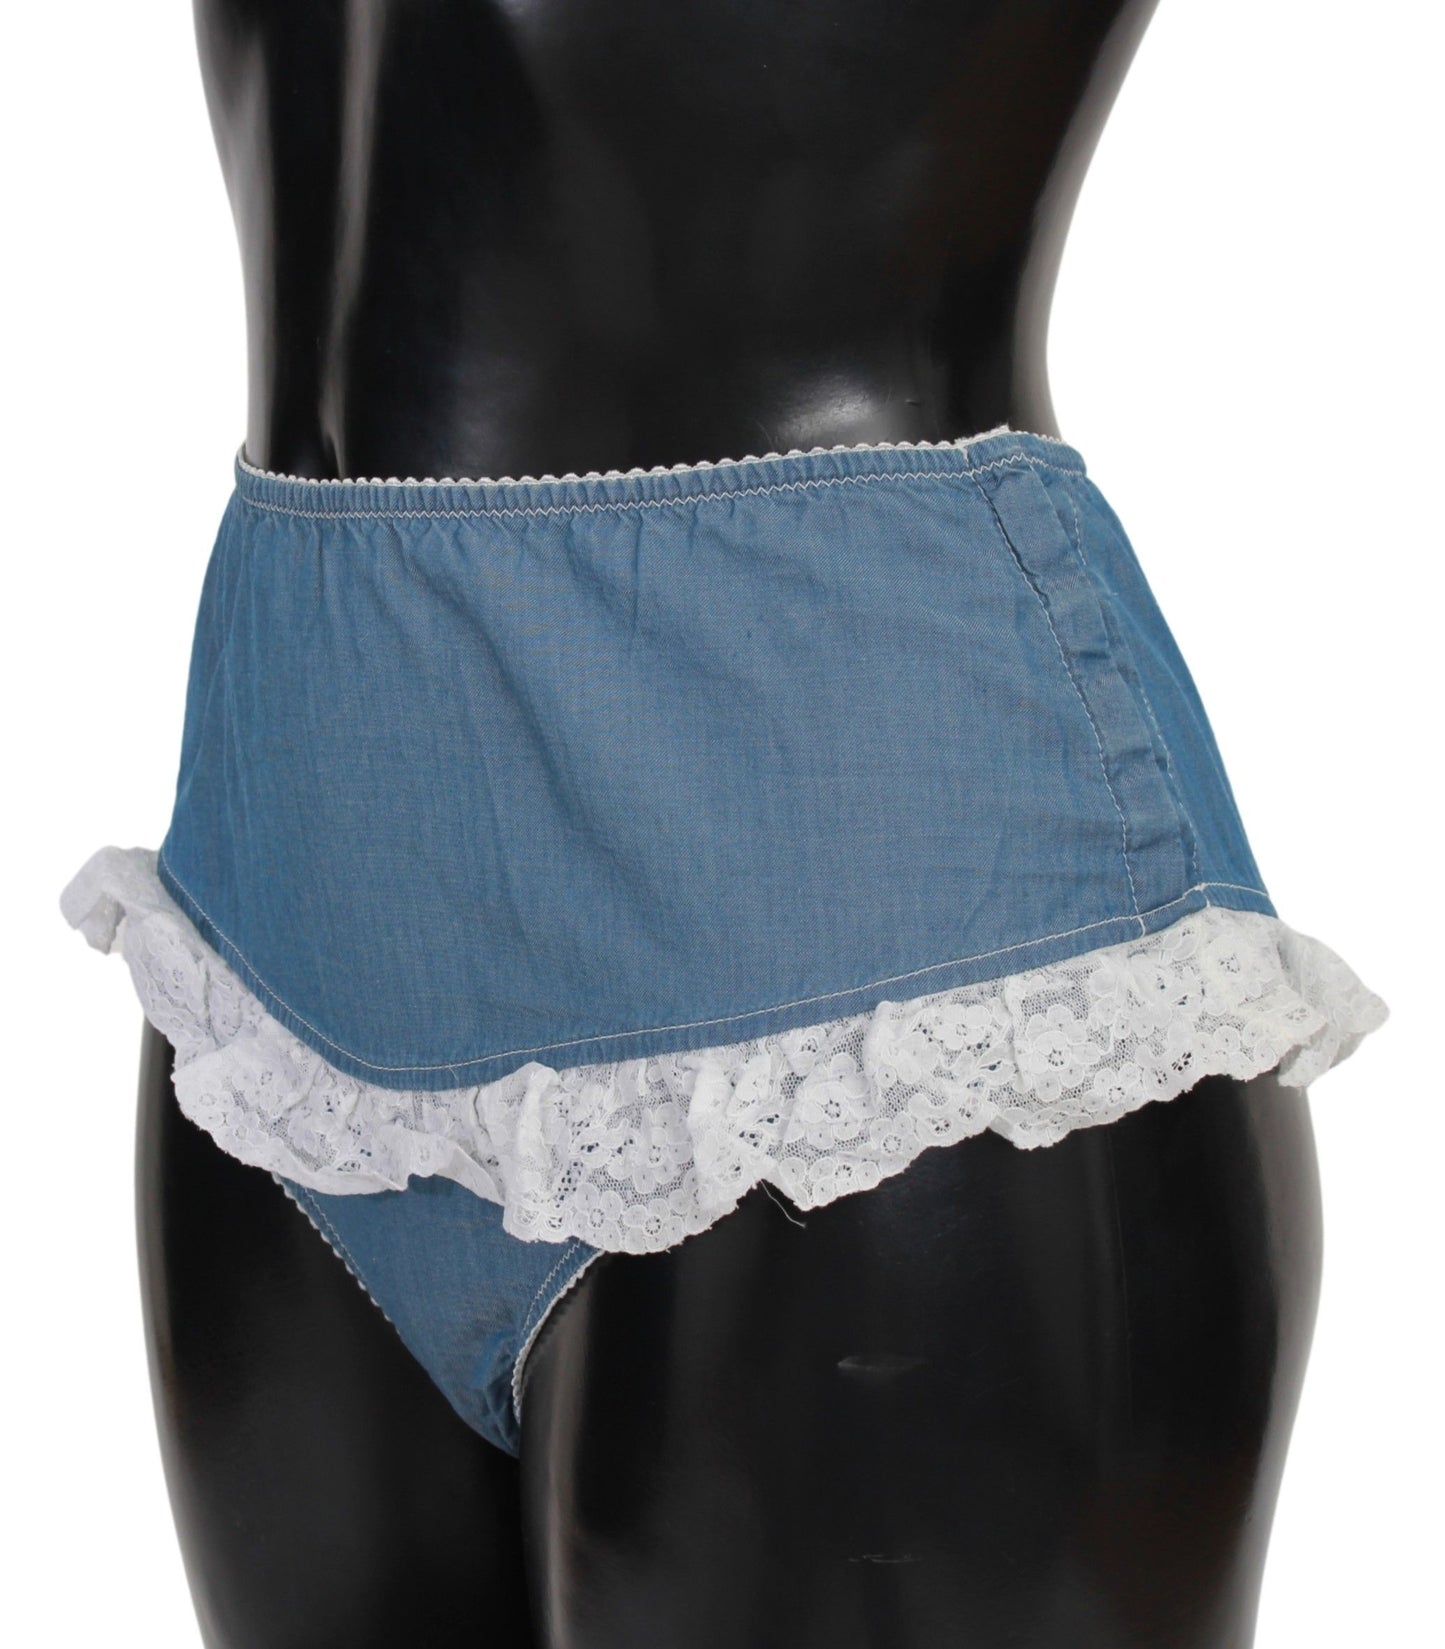 Blue Cotton Lace Slip Denim Bottom Underwear - Designed by Ermanno Scervino Available to Buy at a Discounted Price on Moon Behind The Hill Online Designer Discount Store